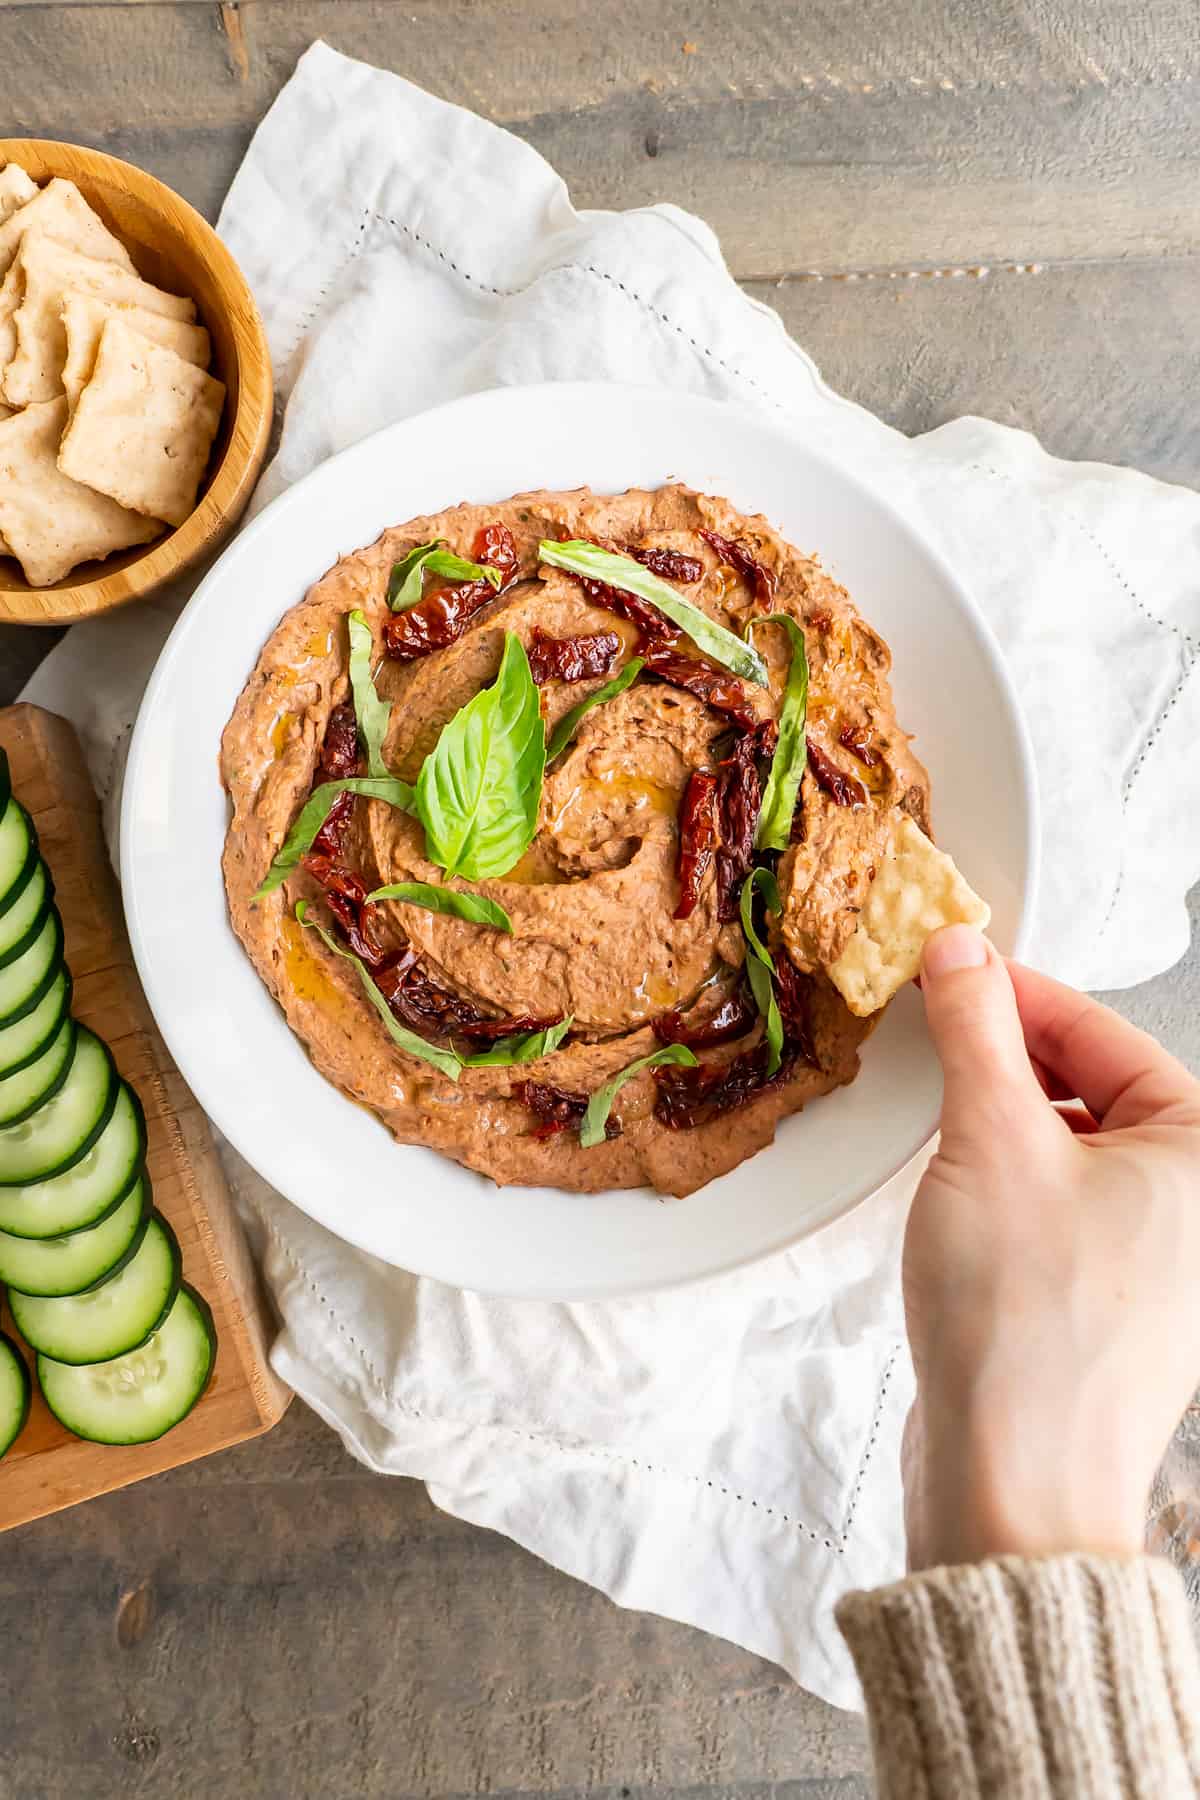 A serving bowl of creamy hummus garnished with sun-dried tomatoes and basil with gluten-free crackers.